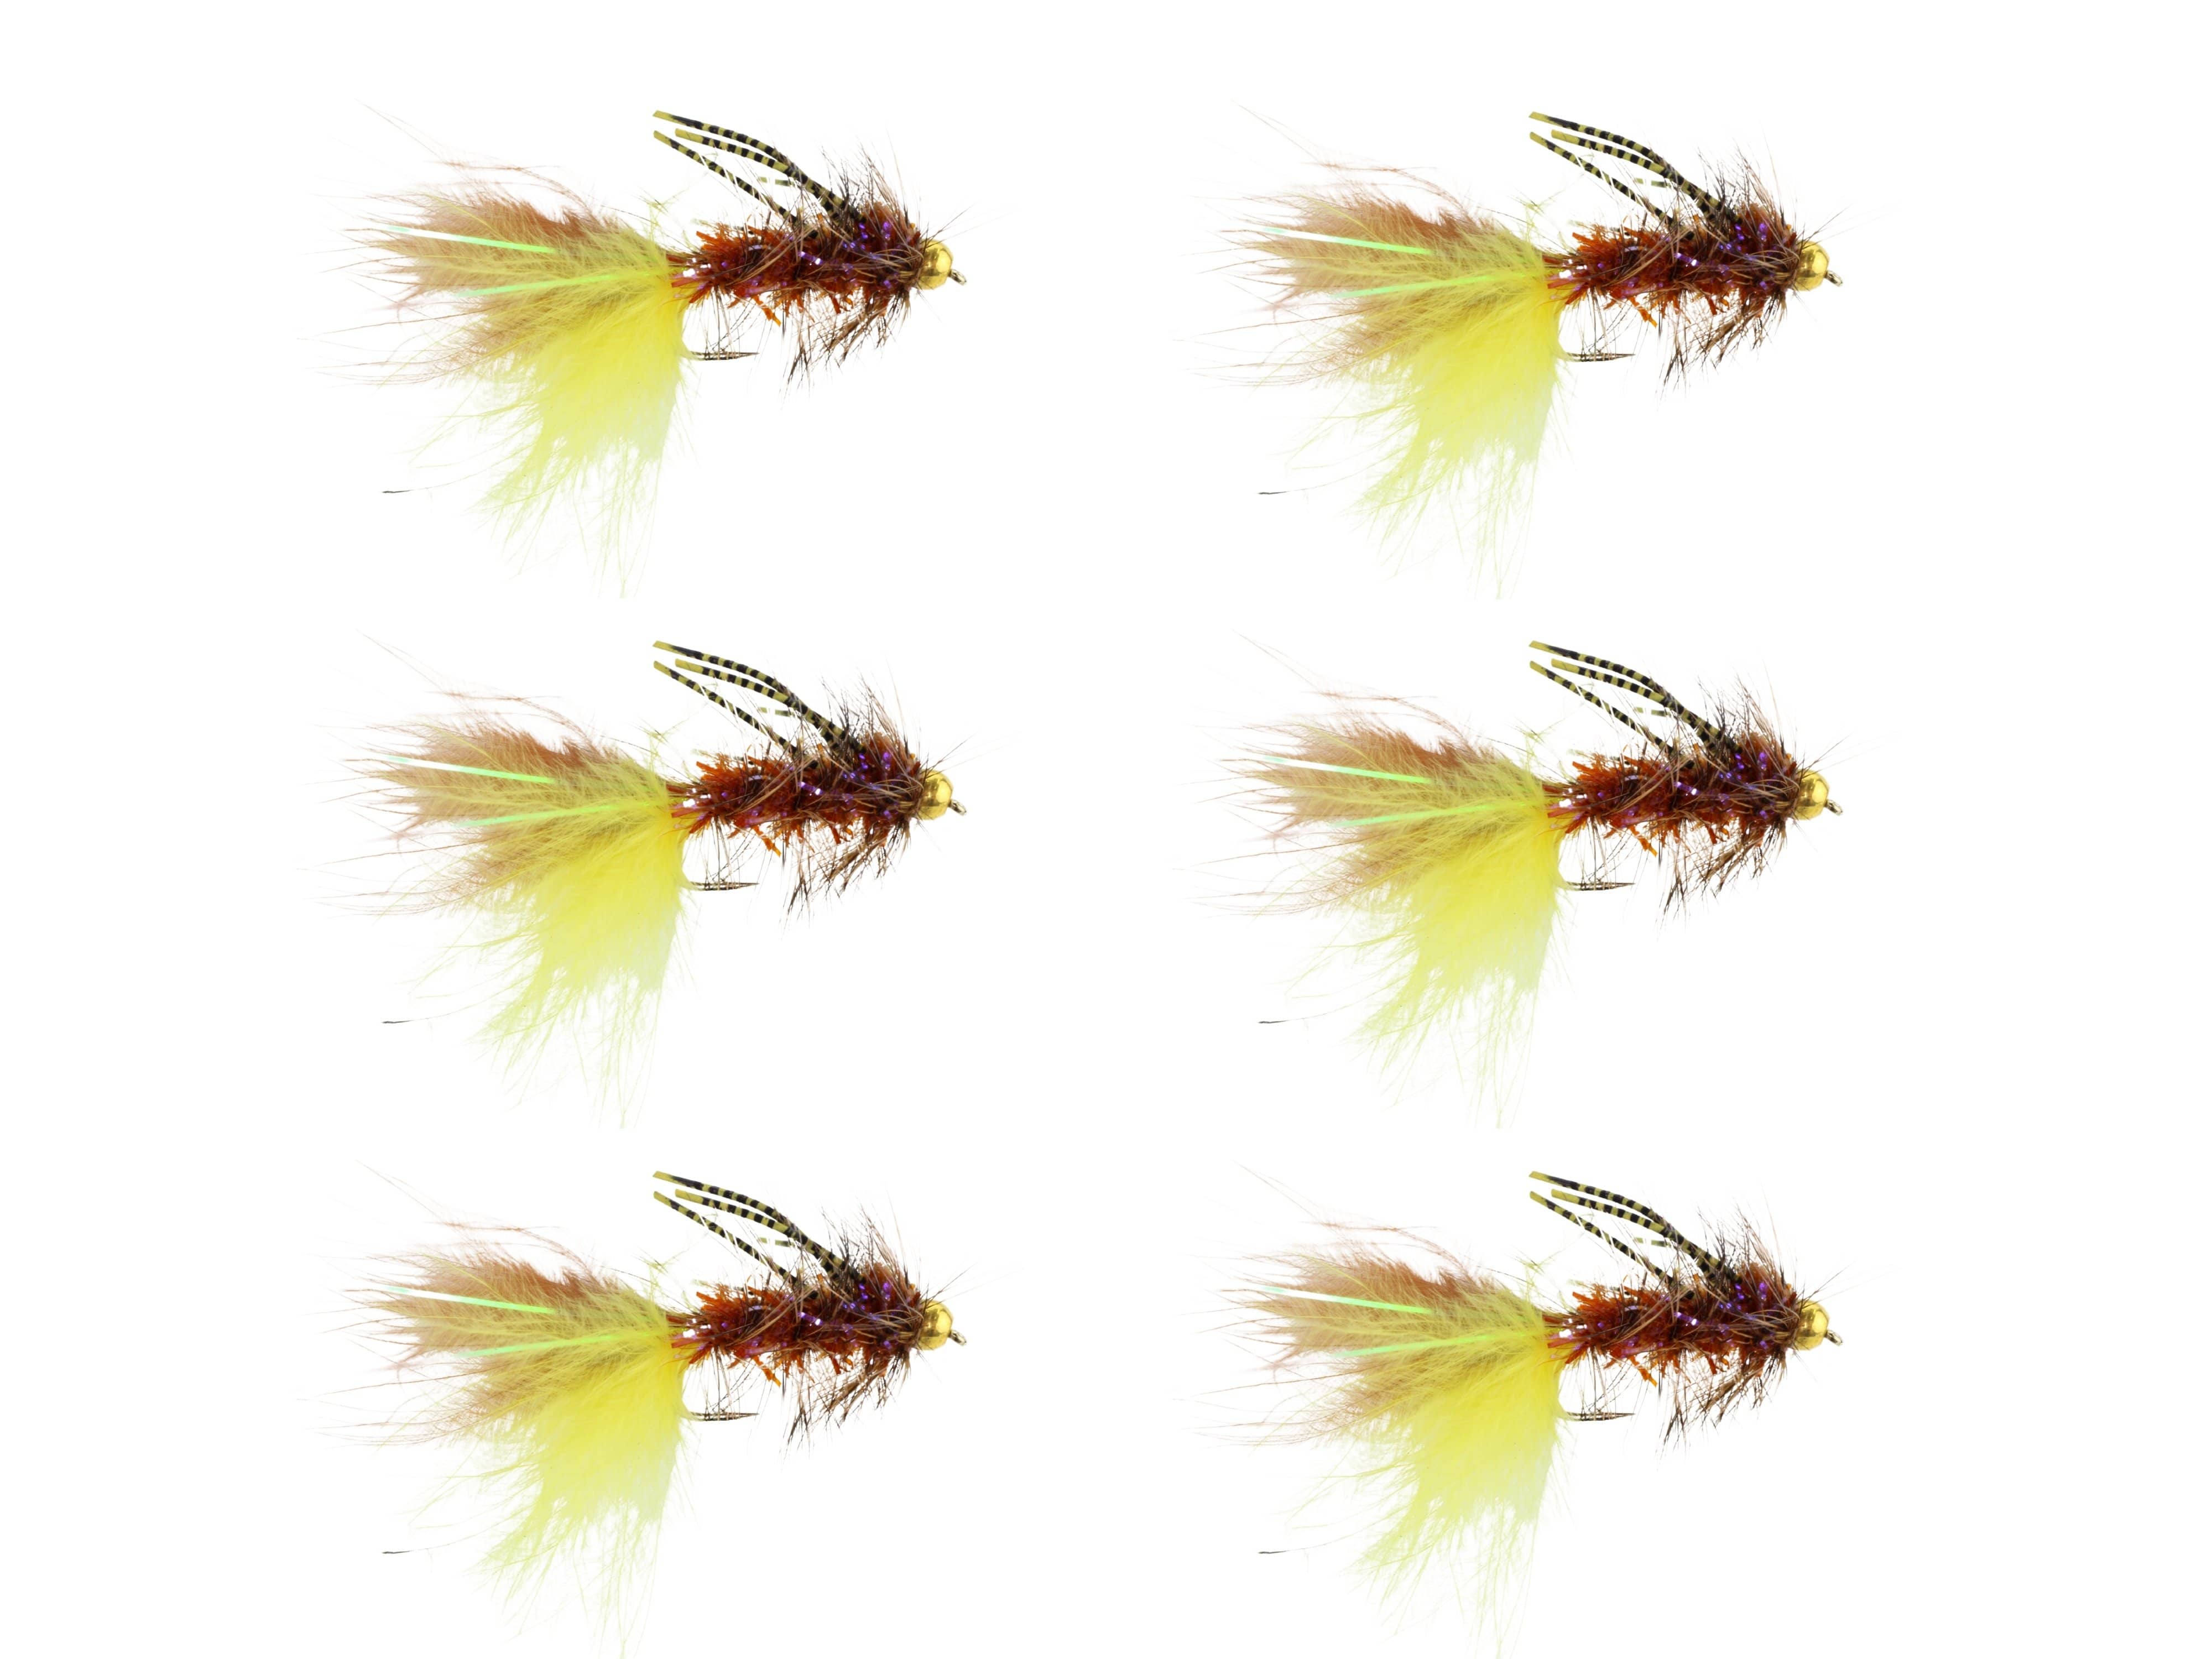 Wild Water Fly Fishing Bead Head Yellow and Brown Rubber Leg Wooly Bugger, size 10, qty. 6